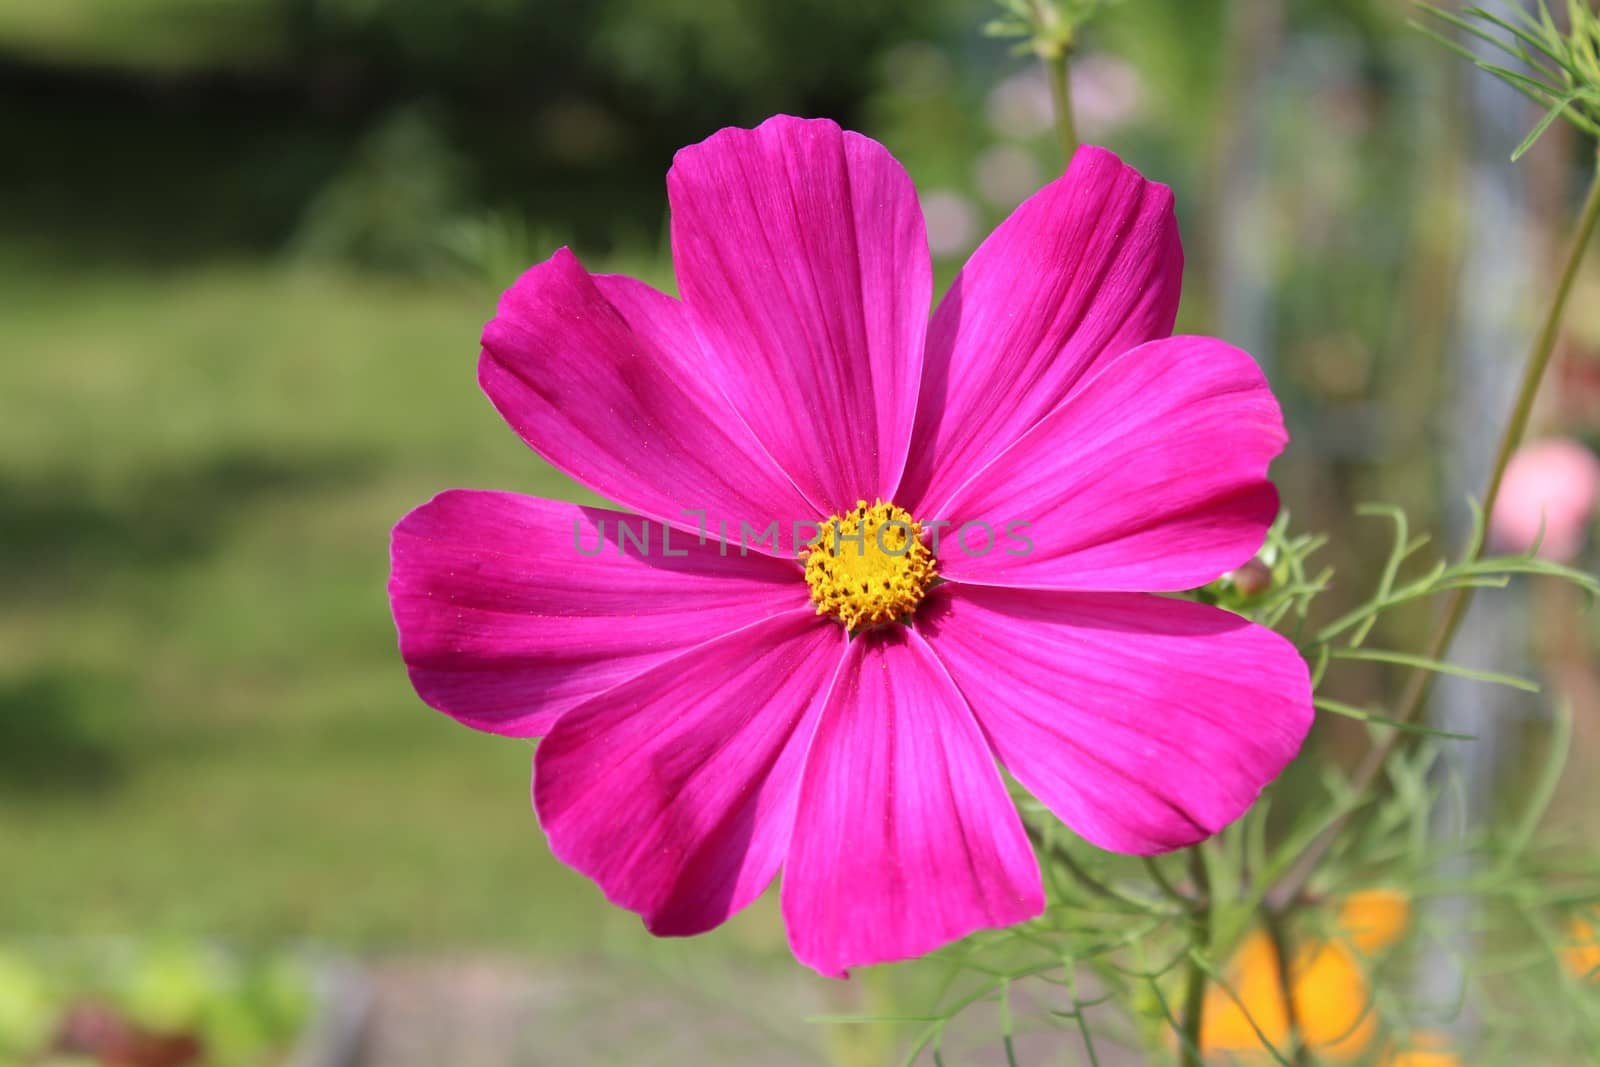 The picture shows a pink flower in the garden.